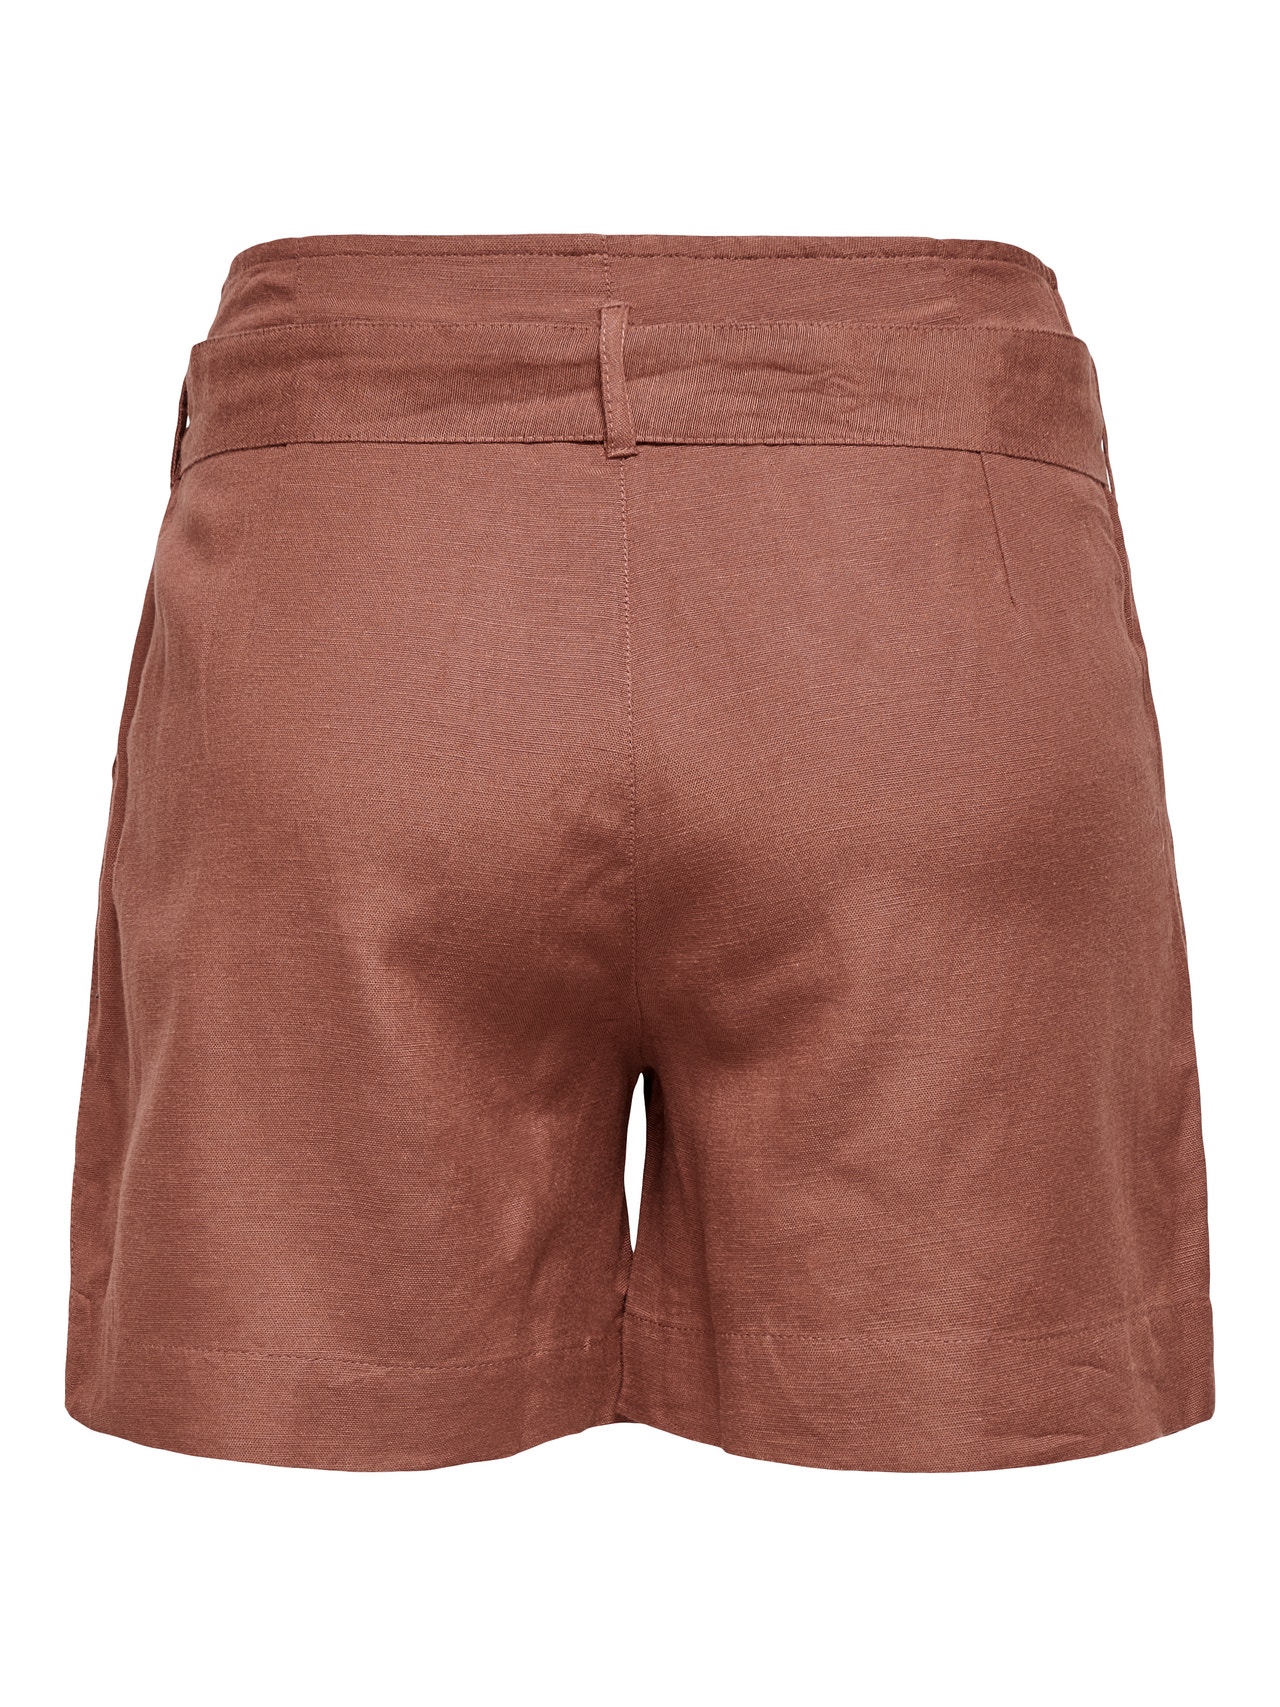 ONLY Komfort Fit Shorts -Apple Butter - 15199801